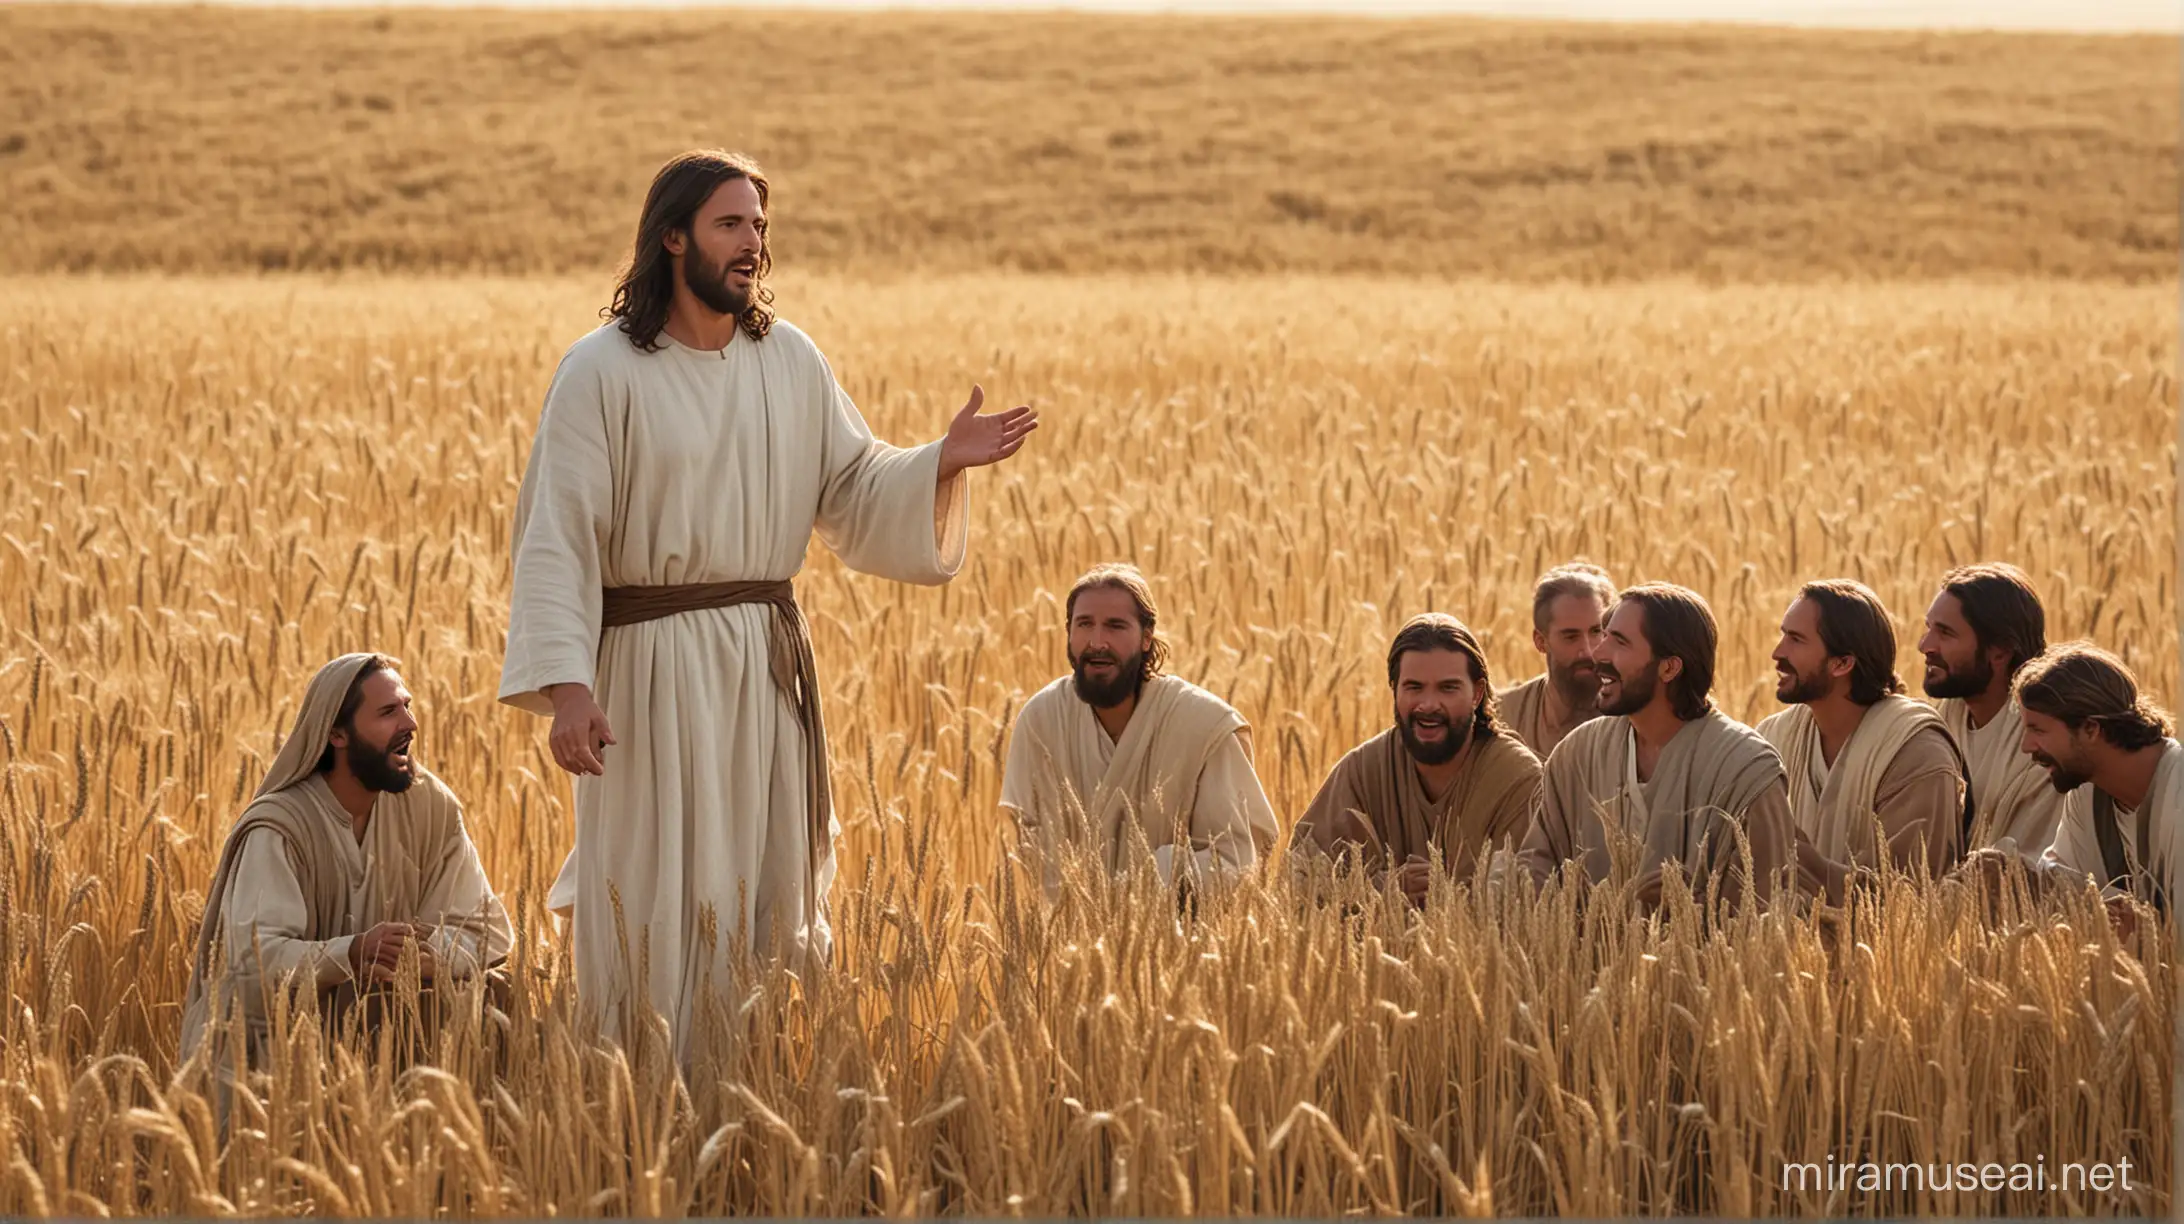 Jesus preaching to his disciples in a wheat field.